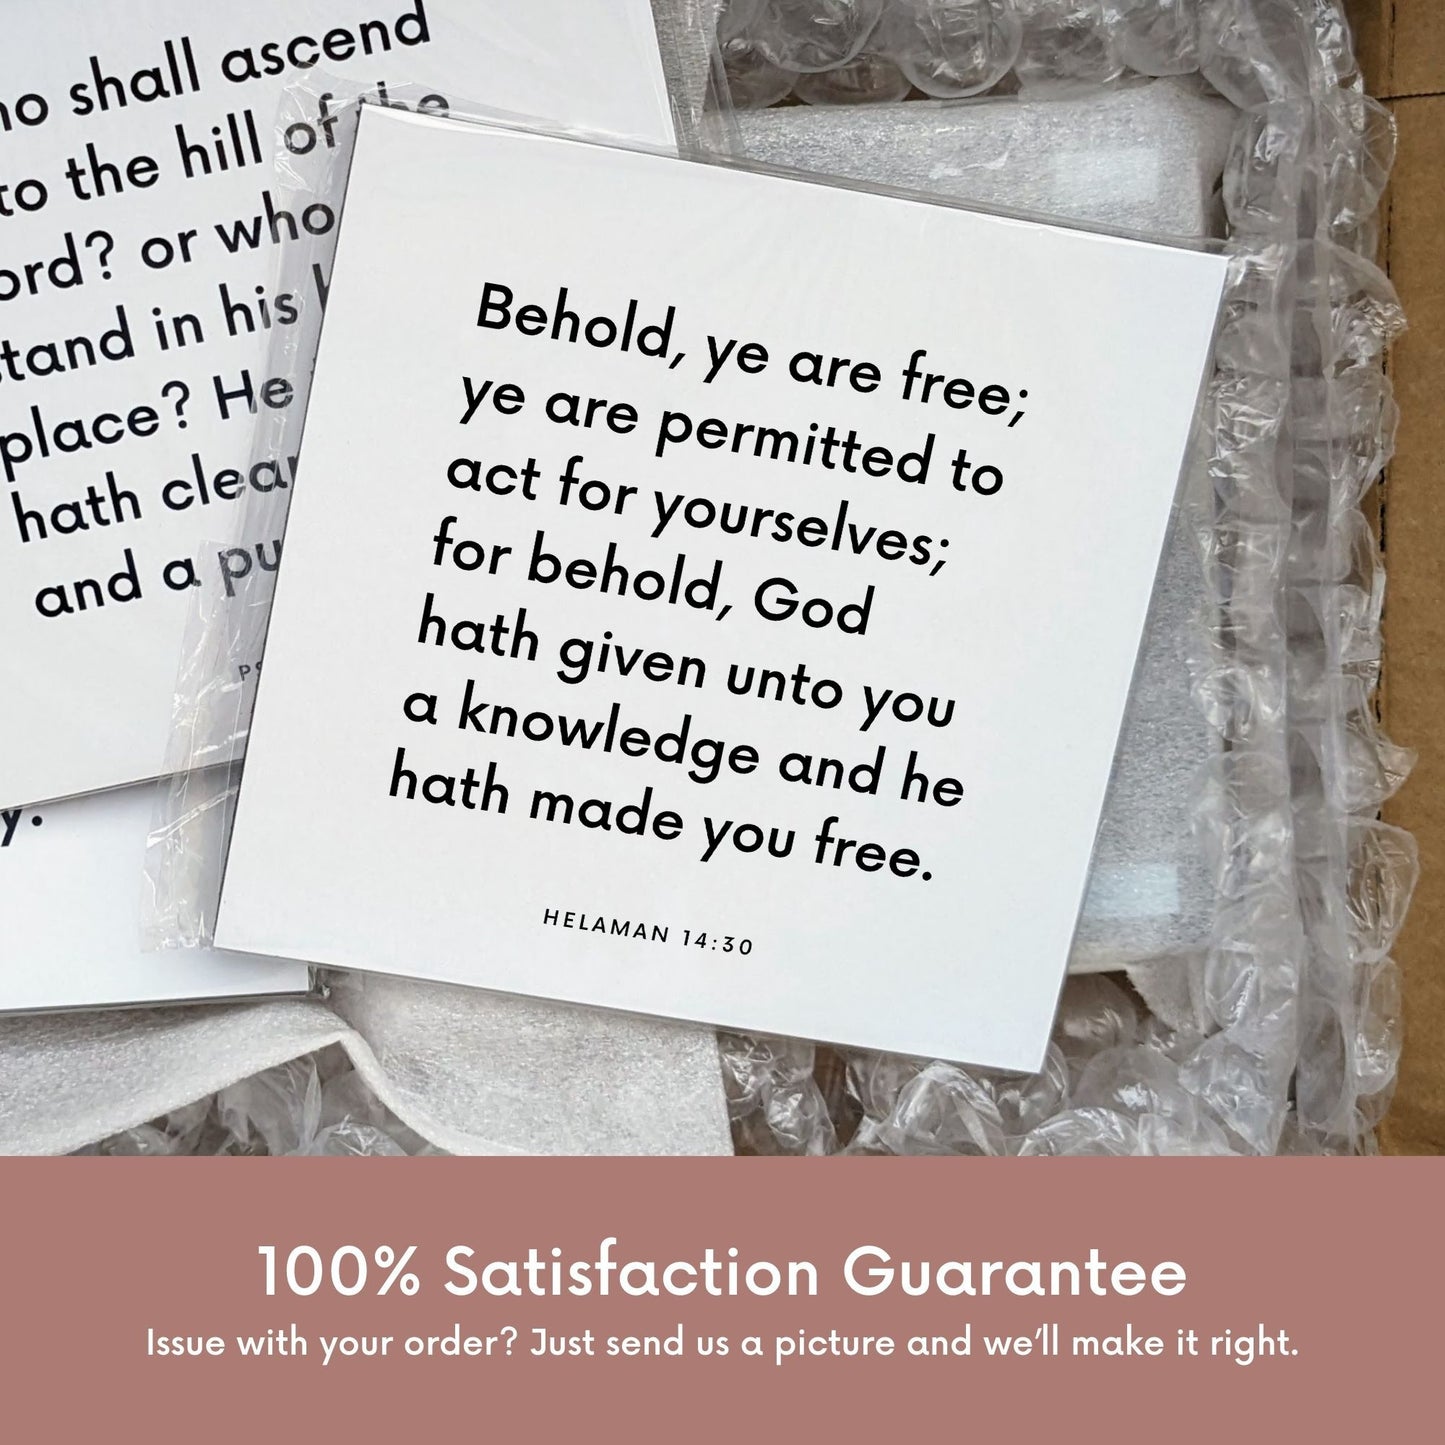 Shipping materials for scripture tile of Helaman 14:30 - "Behold, ye are free; ye are permitted to act for yourselves"